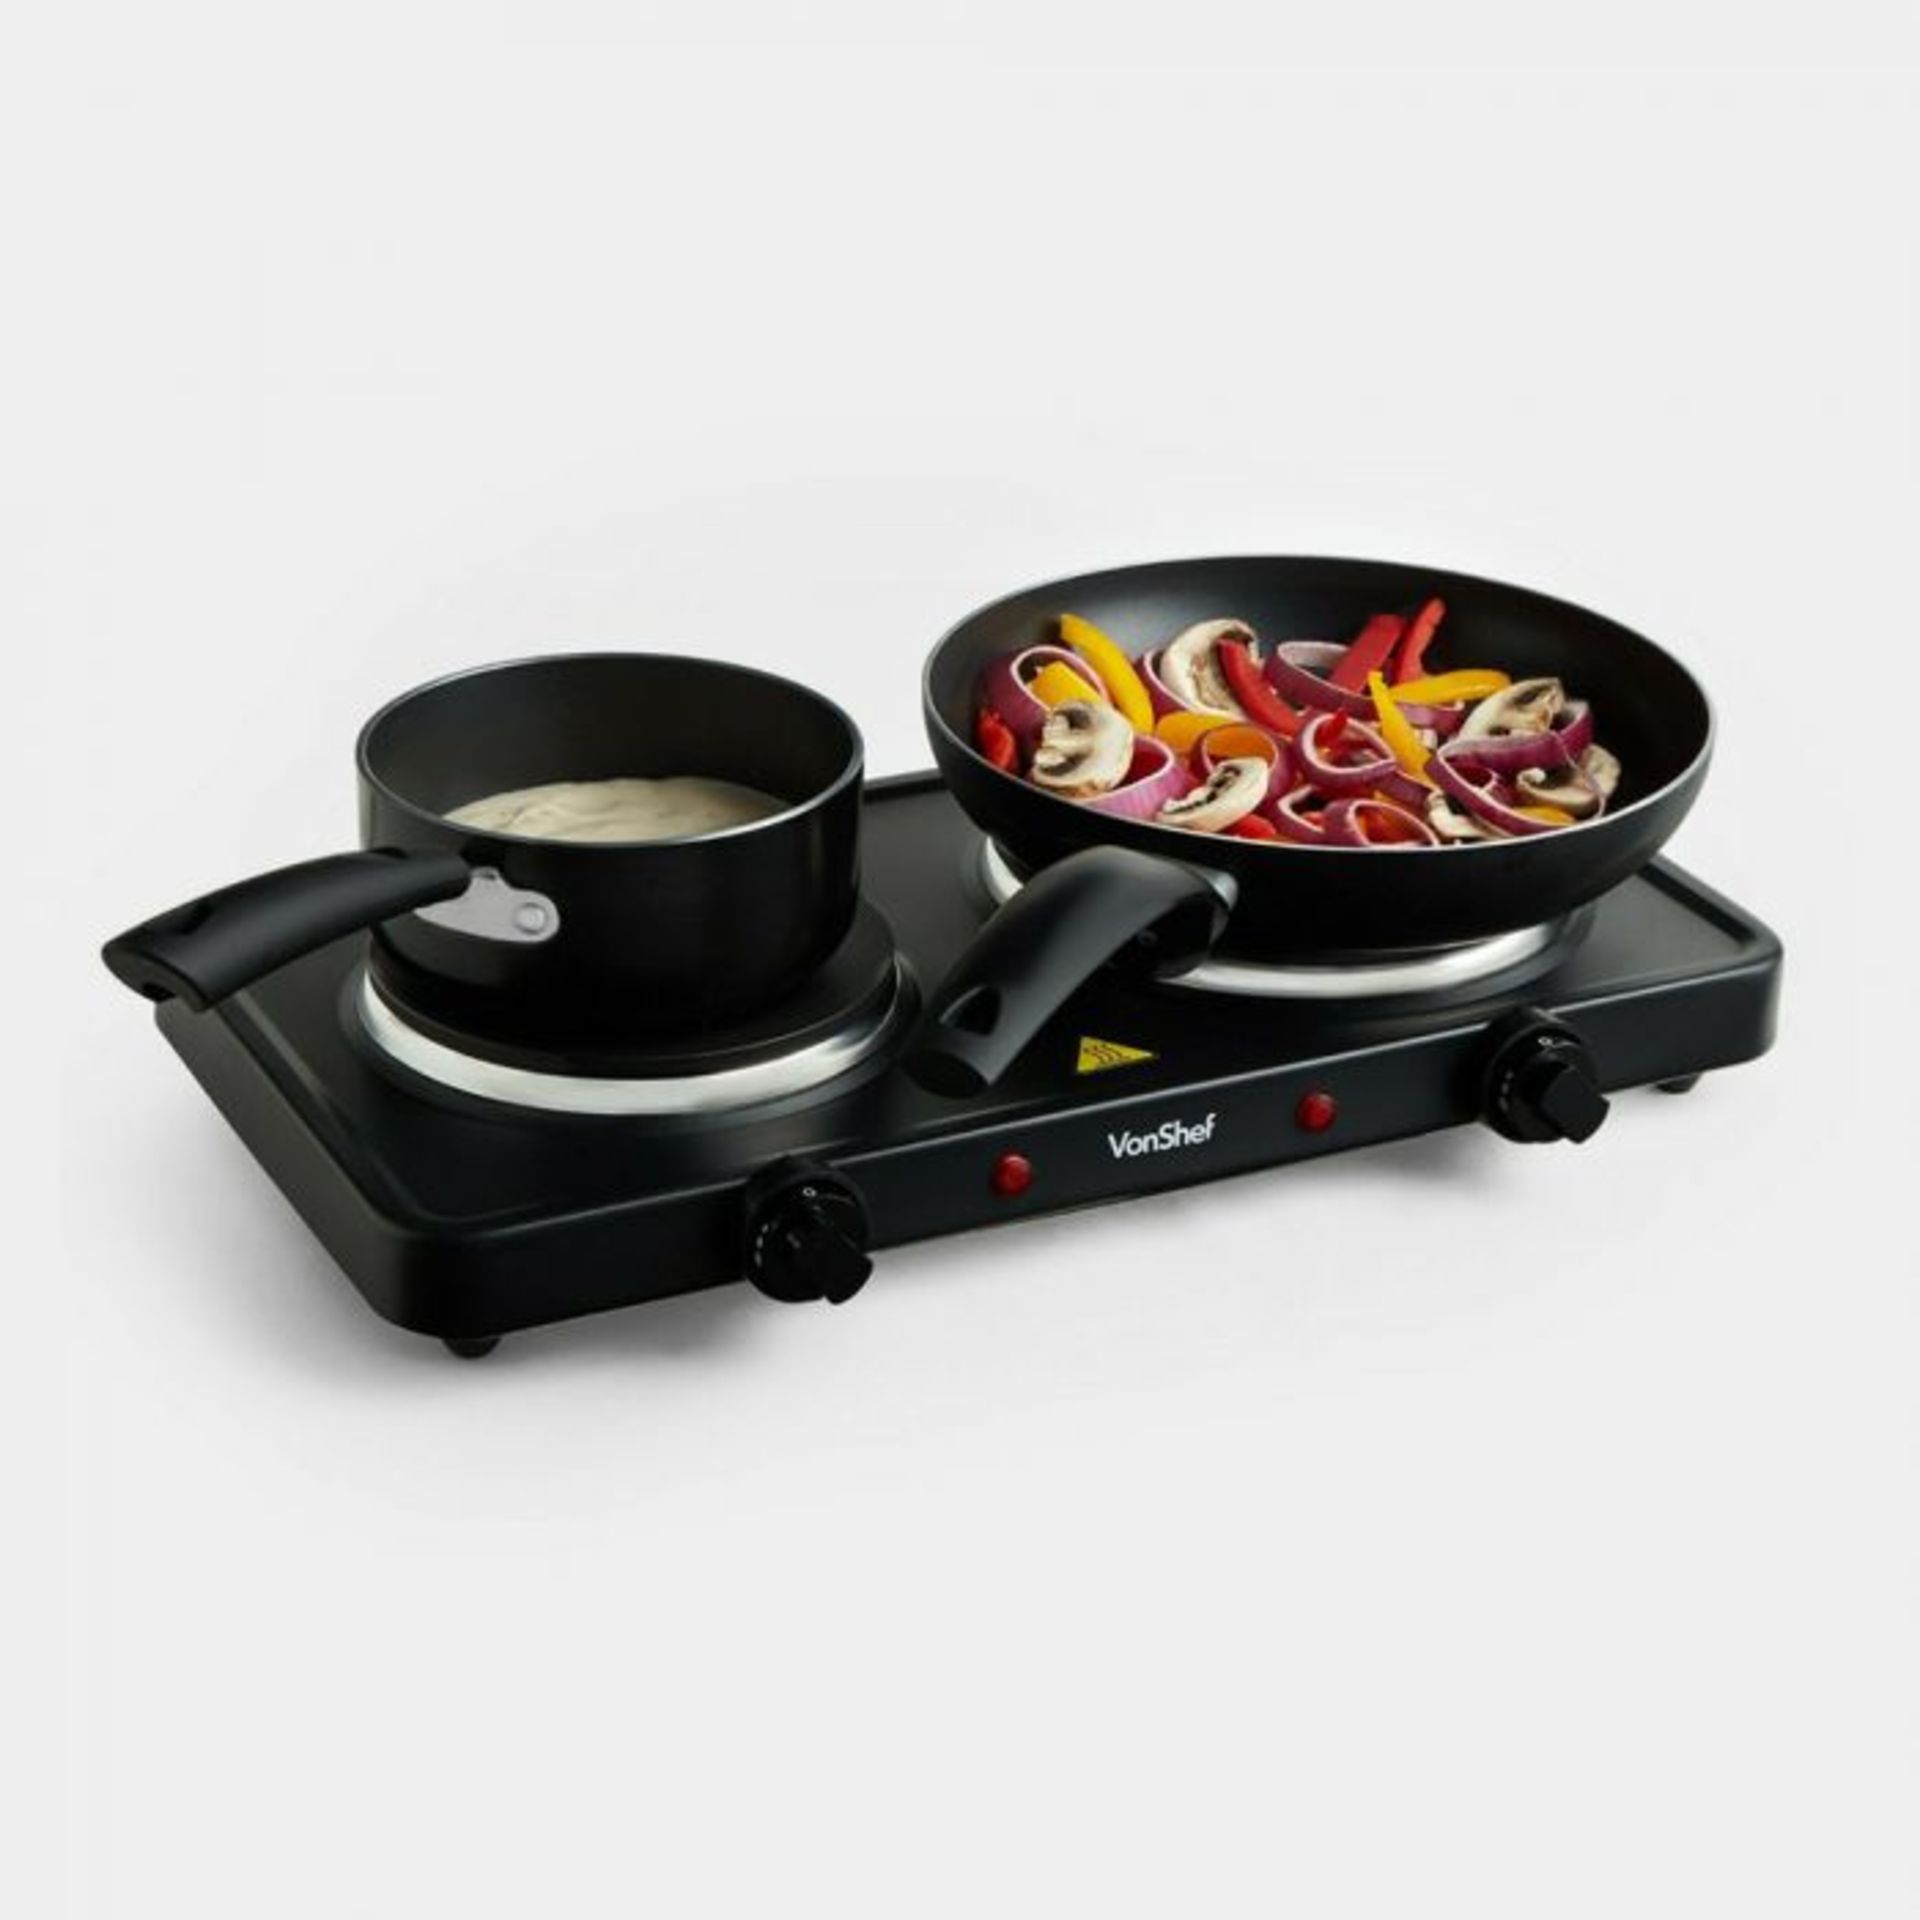 Double Hot Plate. With 5 thermostatically controlled heat settings, from 280-480?, you’re in